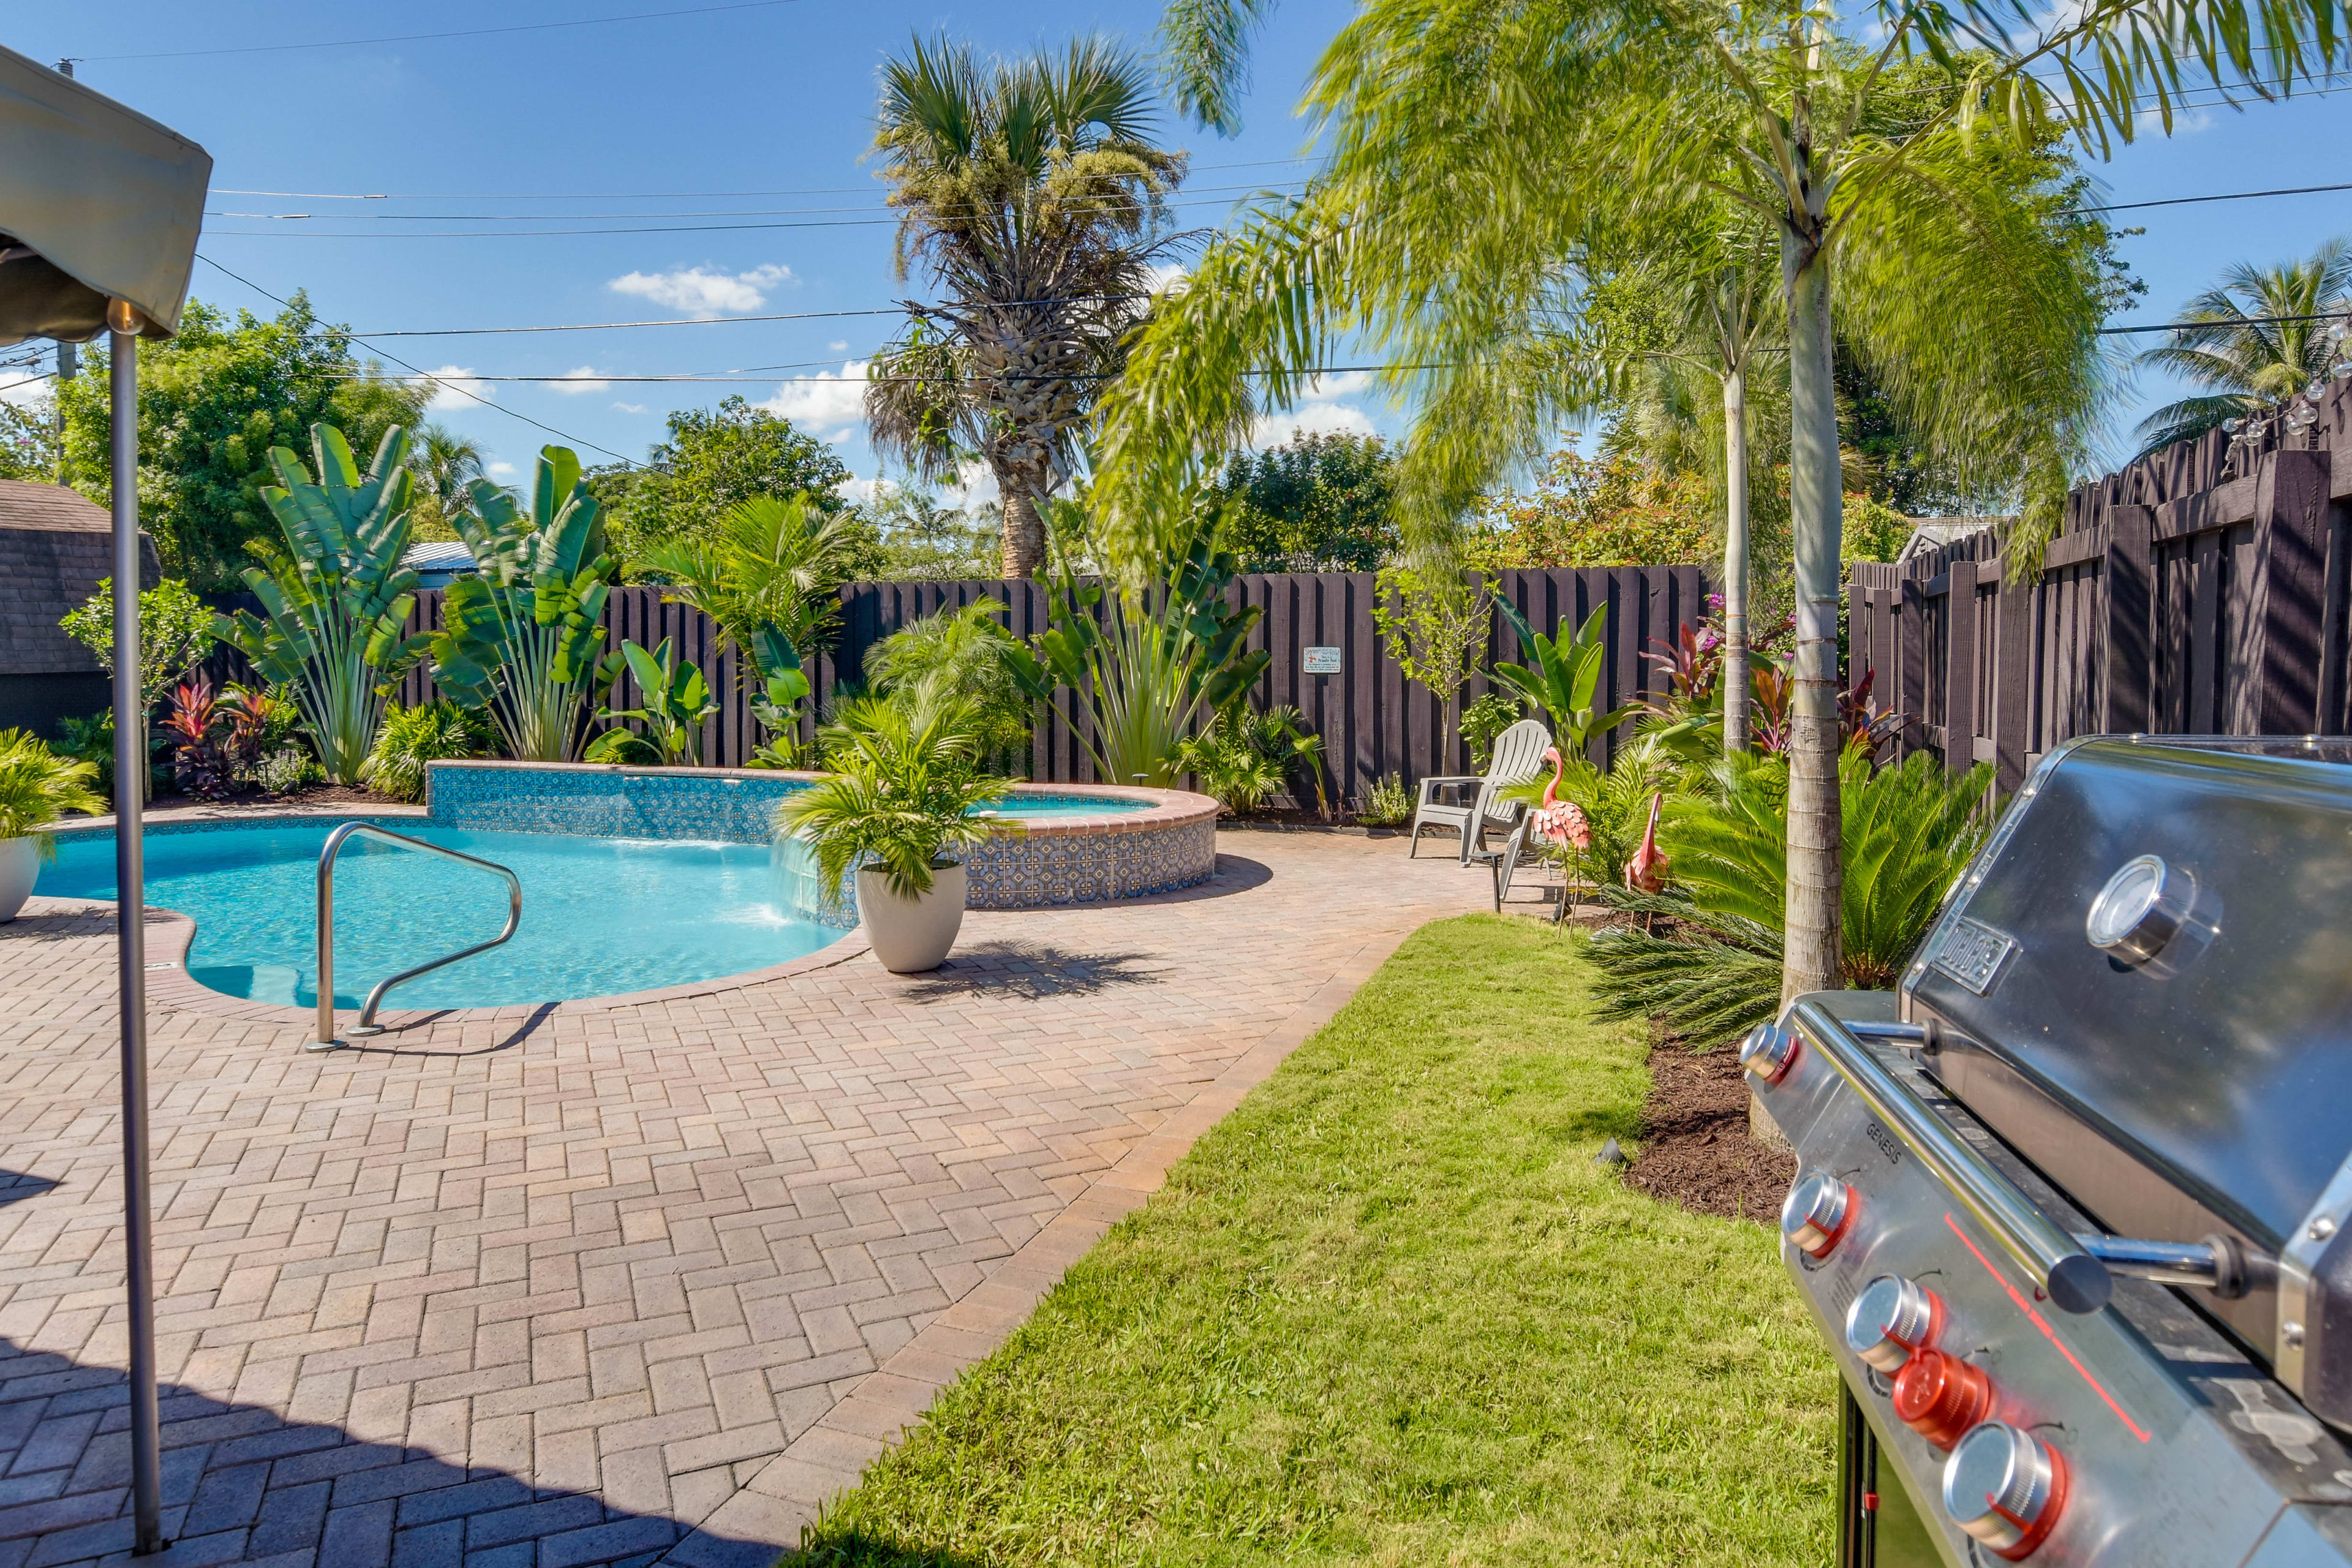 Private Backyard | Pool | Hot Tub | Gas Grill | Lounge Chairs